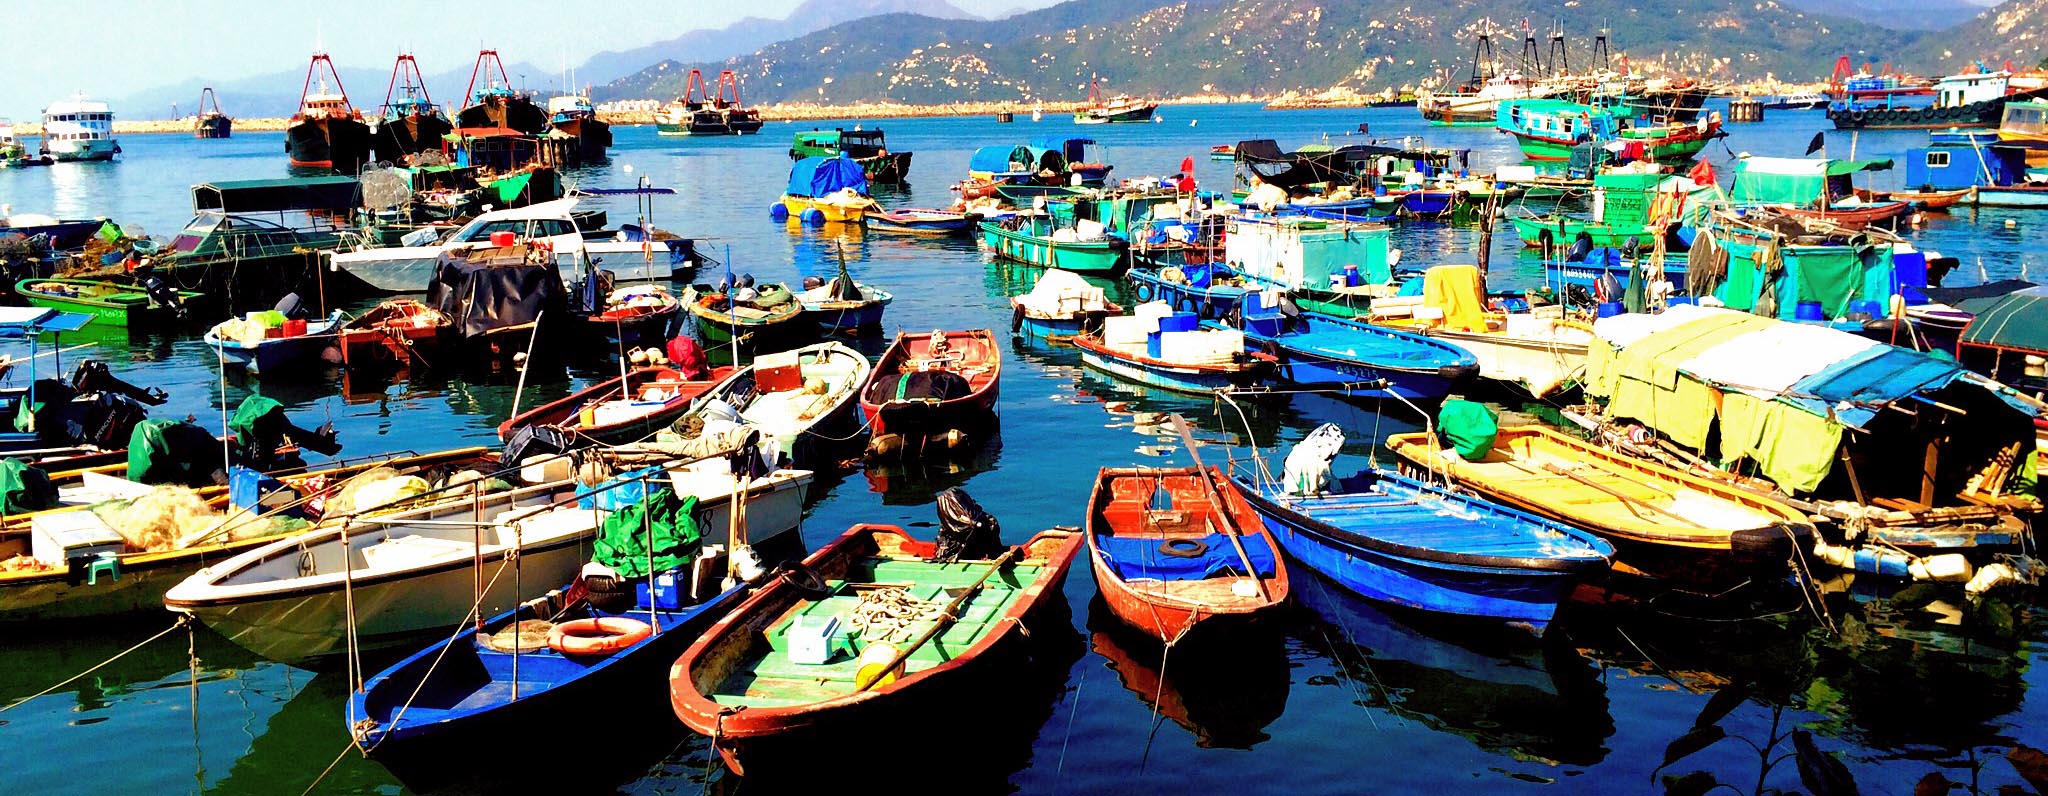  Colorful boats in an Asian harbor